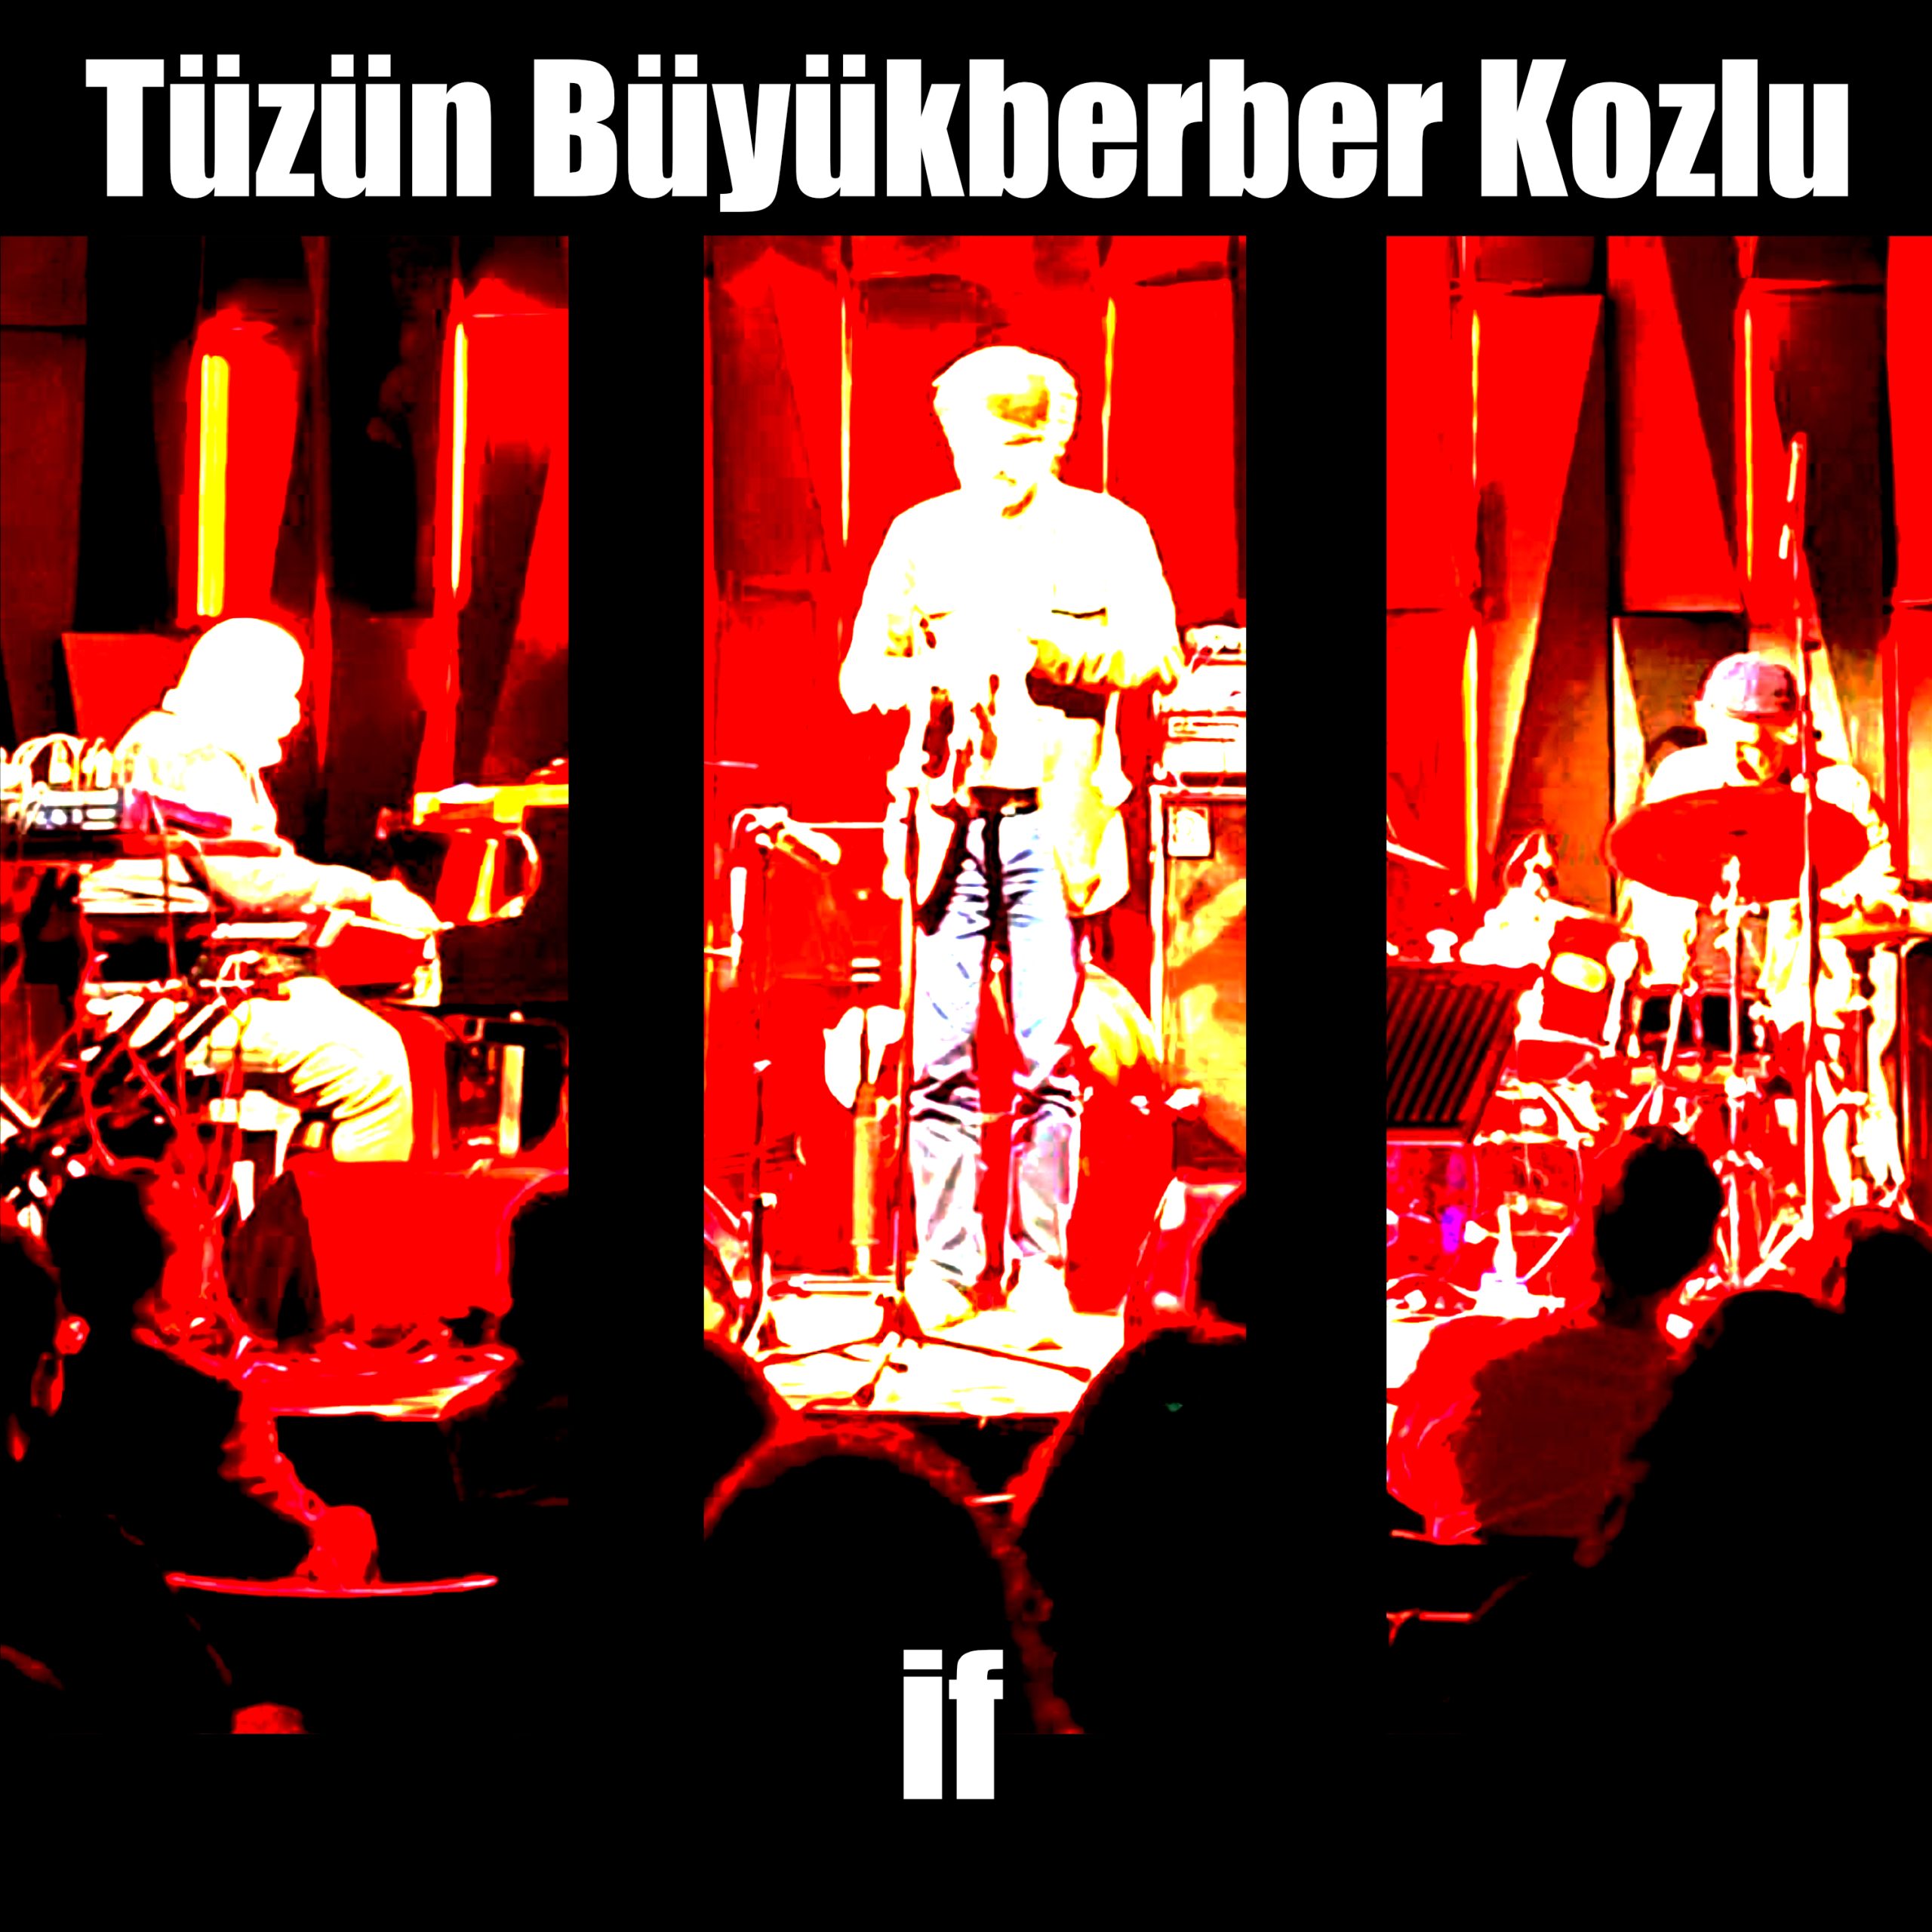 With their avant-grade programming, Akbank Jazz Festival has been instrumental for a generation of musicians in Turkey. For their 30th anniversary, they curated a double disc LP for which Oğuz Büyükberber was commissioned to compose and record an original. The following Year, Can Kozlu and Tolga Tüzün were the easy answer for Büyükberber when he was invited to perform live with his favorite line up for the 31st edition. This event was the first major festival after the COVID-19 pandemic hit, and it was inevitably very powerful, both for the musicians and the public. Decades long collaboration of Büyükberber, Tüzün and Kozlu made up for a smooth yet energetic program. Which is all about a push and pull between the overlapping and individual influences each of these virtuoso players have. Broken bebop to jazzified electro maqam, and off to instant contemporary composition…